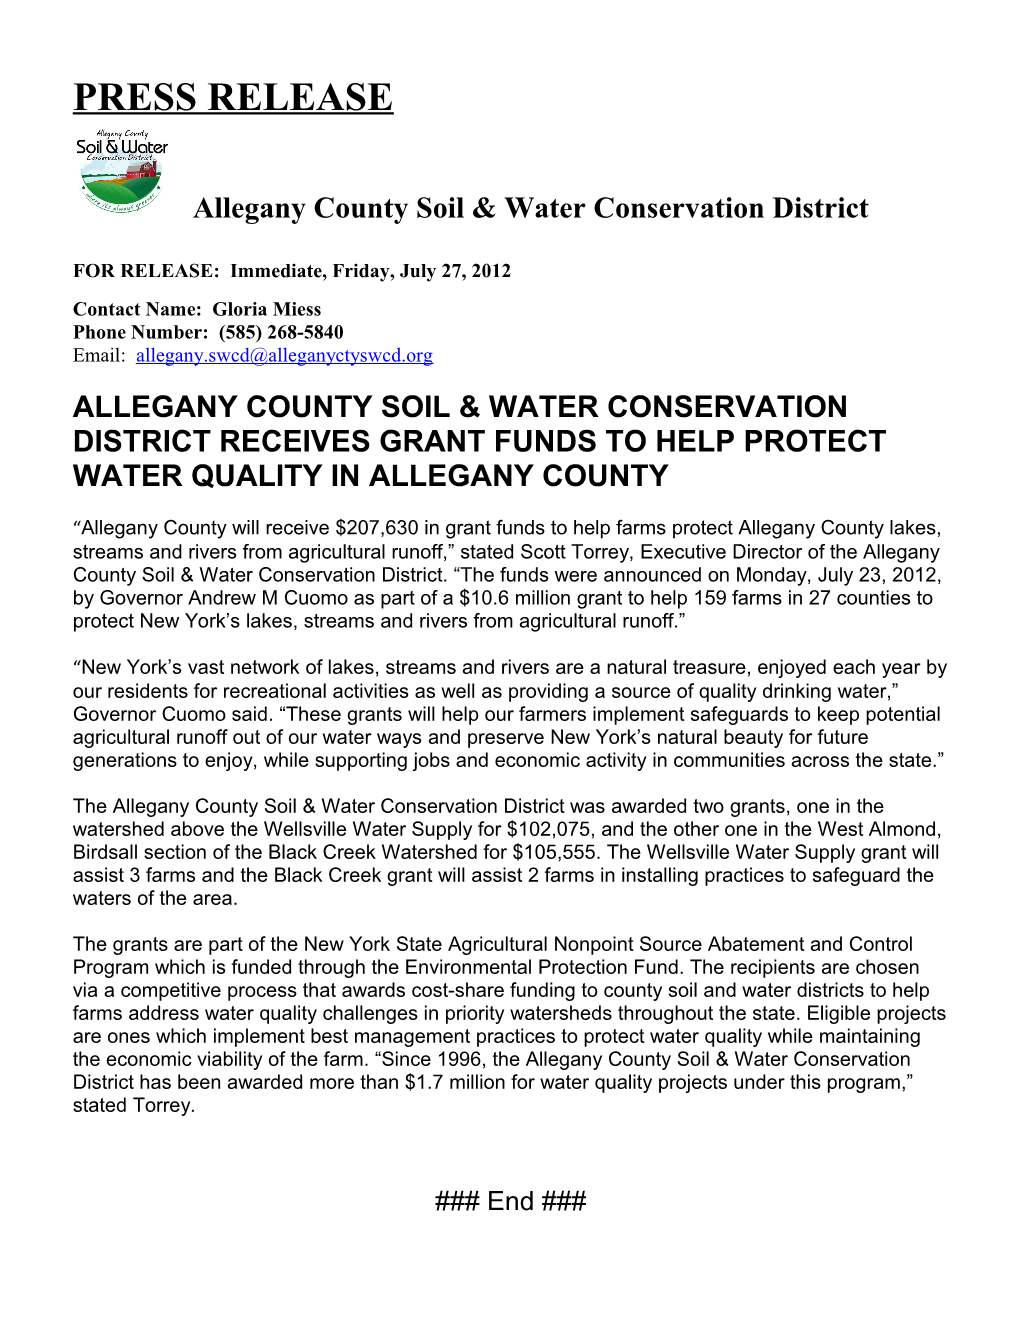 Allegany County Soil & Water Conservation District